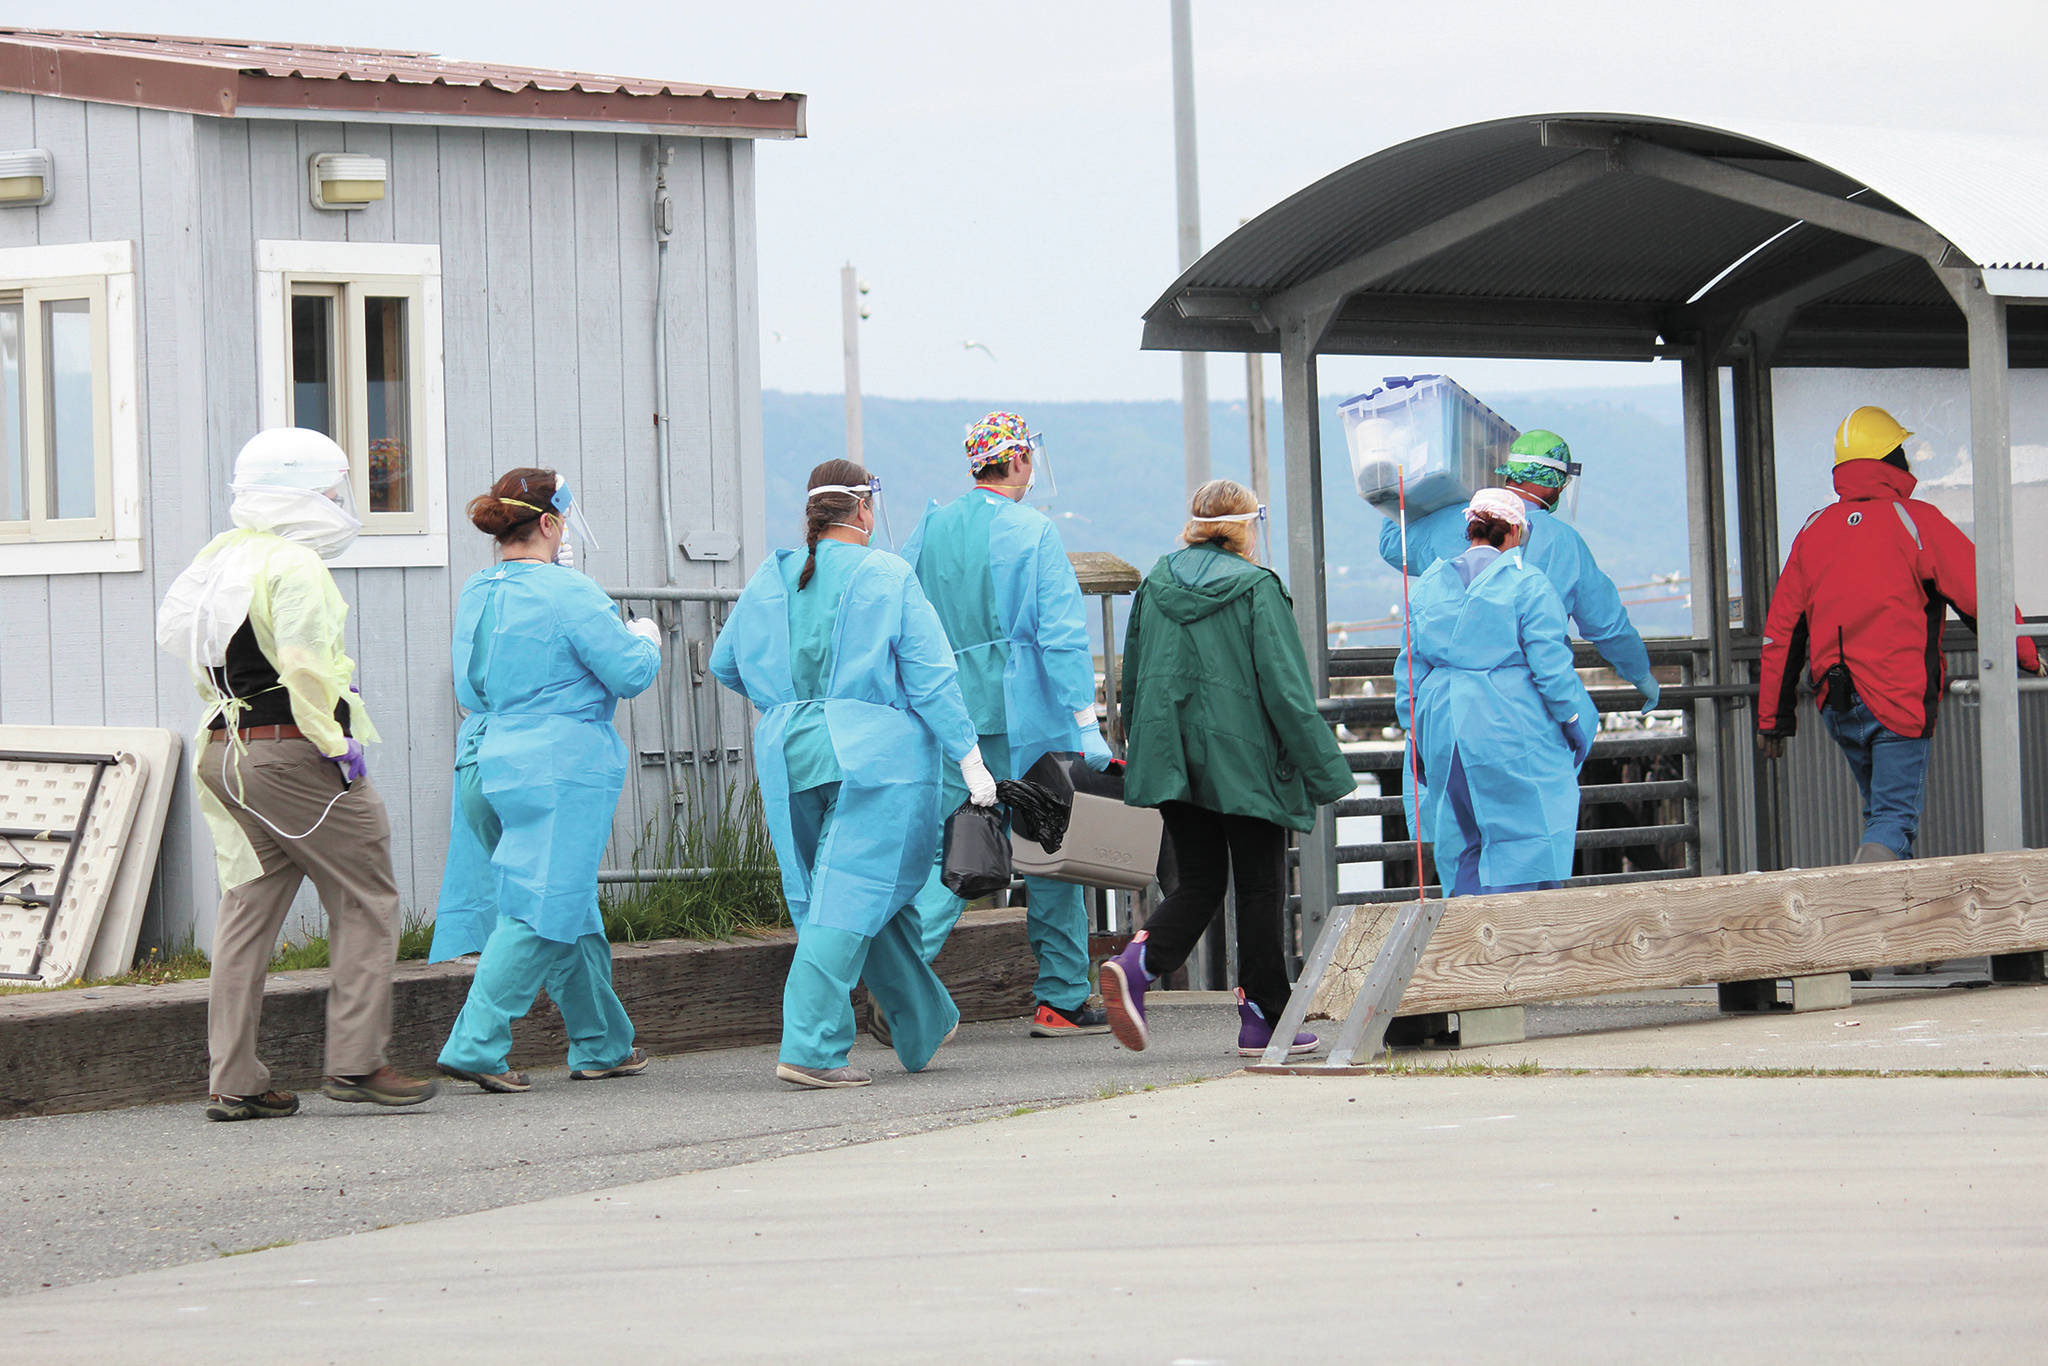 Staff from South Peninsula Hospital and Homer Public Health prepare to board the M/V Tustumena to test 35 crew and six passengers after it docked at the Homer Ferry Terminal on Monday, June 8, 2020 in Homer, Alaska. (Photo by Megan Pacer/Homer News)